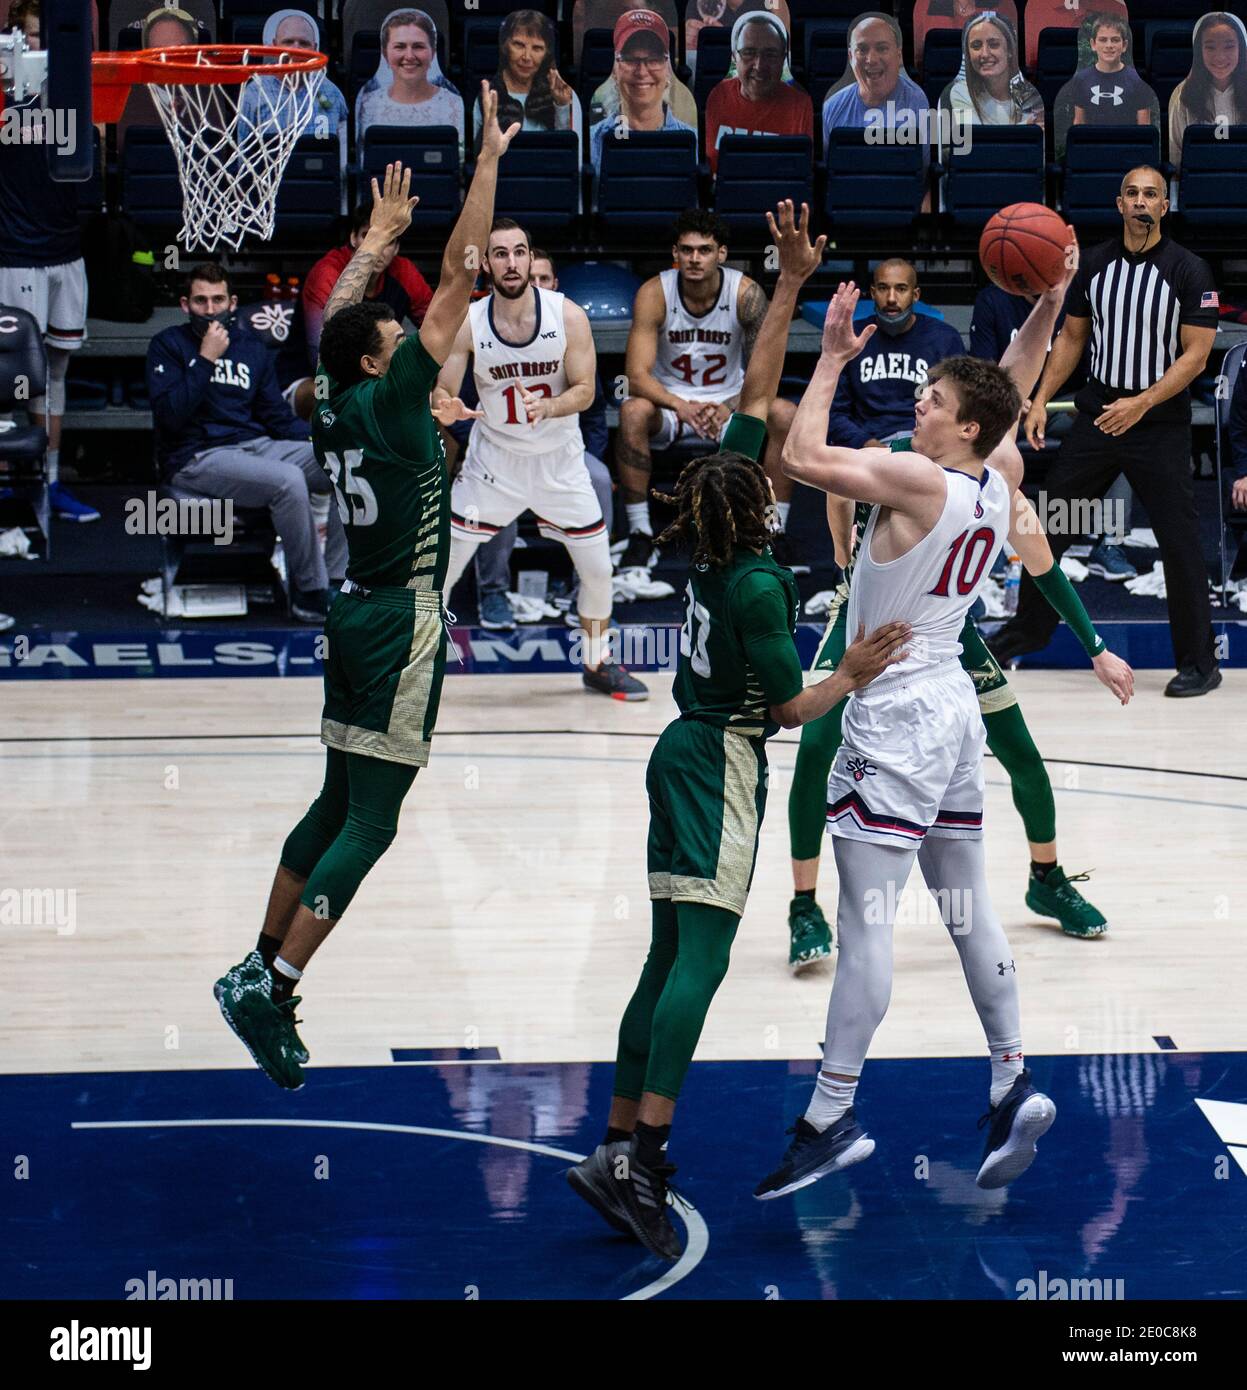 Moraga, CA U.S. 30th Dec, 2020. A. St. Mary's Gaels center Mitchell Saxen (10) takes a shot a the top of the key during the NCAA Men's Basketball game between Sacramento State Hornets and the Saint Mary's Gaels 63-45 win at McKeon Pavilion Moraga Calif. Thurman James/CSM/Alamy Live News Stock Photo